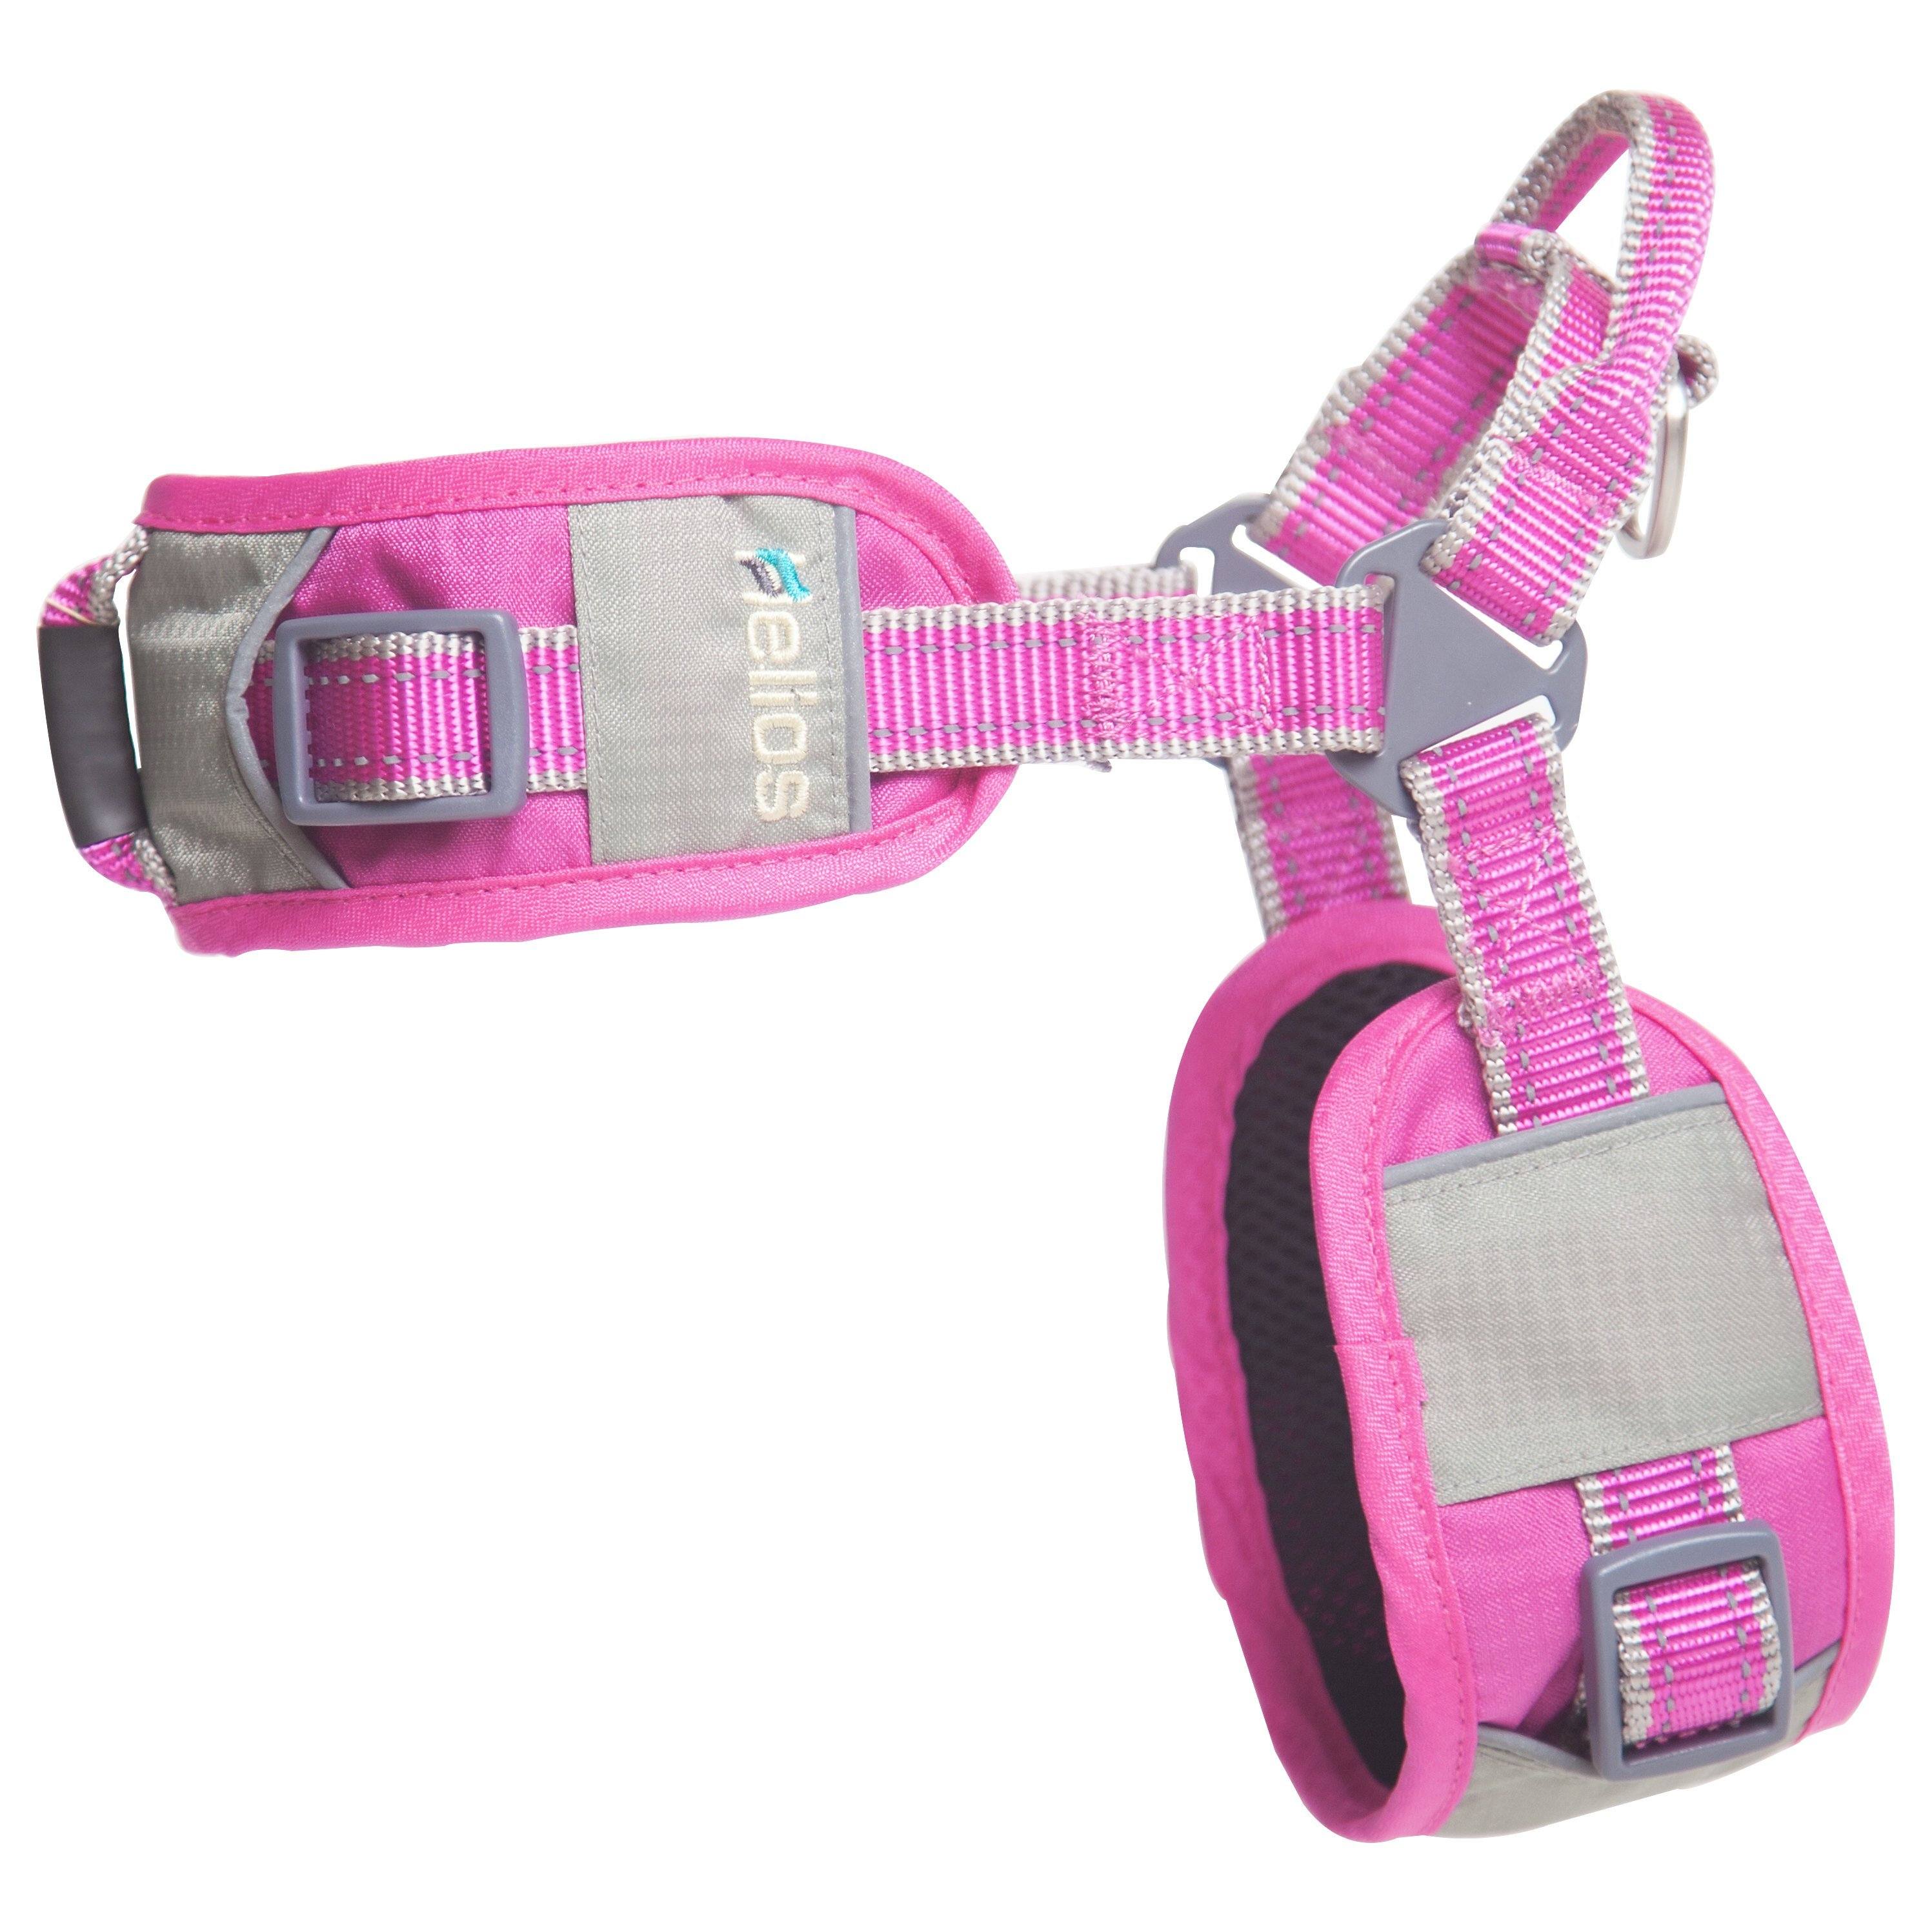 Dog Helios 'Geo-turf' Performance Adjustible and Reflective Dog Harness and Leash Small Pink